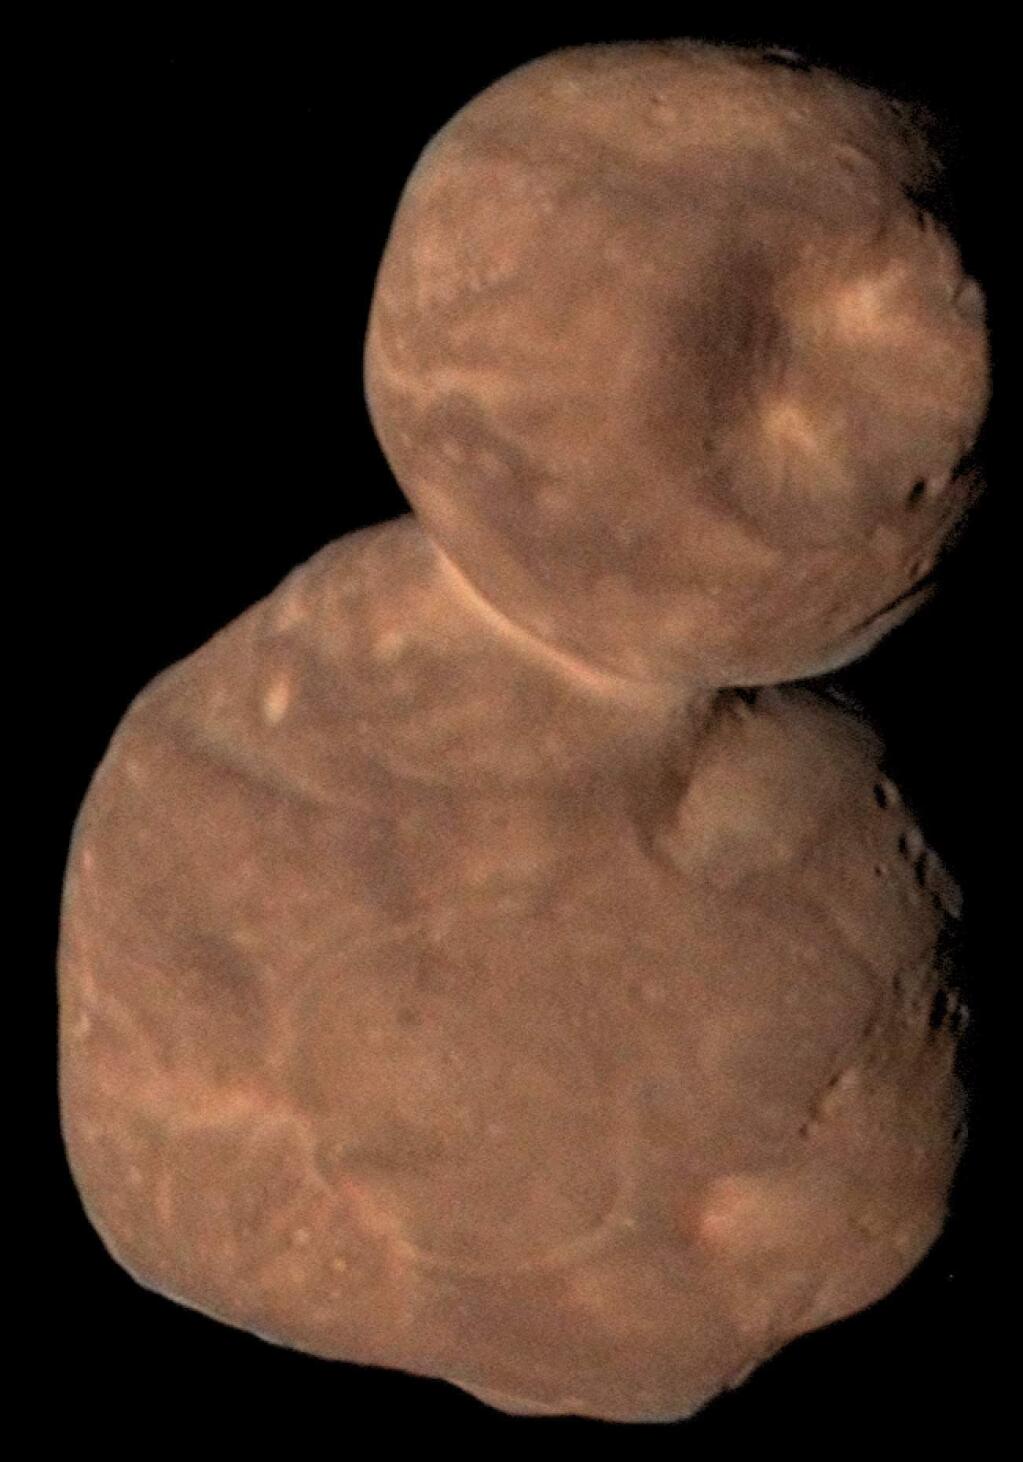 This Jan. 1, 2019 image from NASA shows Arrokoth, the farthest, most primitive object in the Solar System ever to be visited by a spacecraft. Astronomers reported Thursday, Feb. 13, 2020 that this pristine, primordial cosmic body photographed by the New Horizons probe is relatively smooth with far fewer craters than expected. It's also entirely ultrared, or highly reflective, which is commonplace in the faraway Twilight Zone of our solar system known as the the Kuiper Belt. (NASA/Johns Hopkins University Applied Physics Laboratory/Southwest Research Institute/Roman Tkachenko via AP)